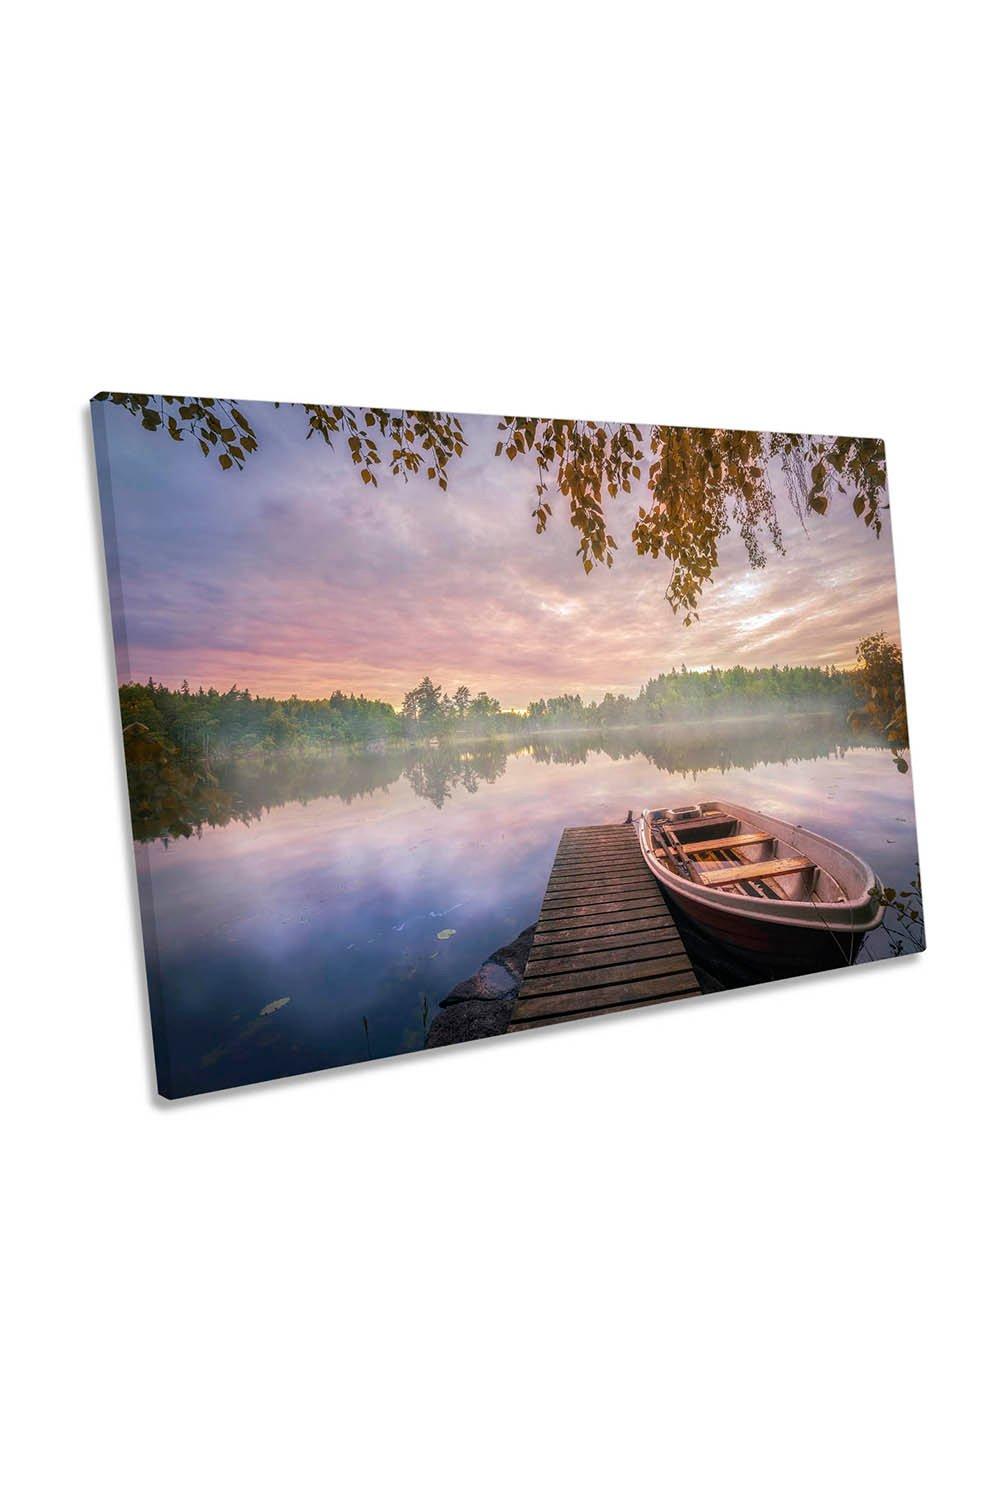 Colourful Lake Jetty Boat Peaceful Canvas Wall Art Picture Print